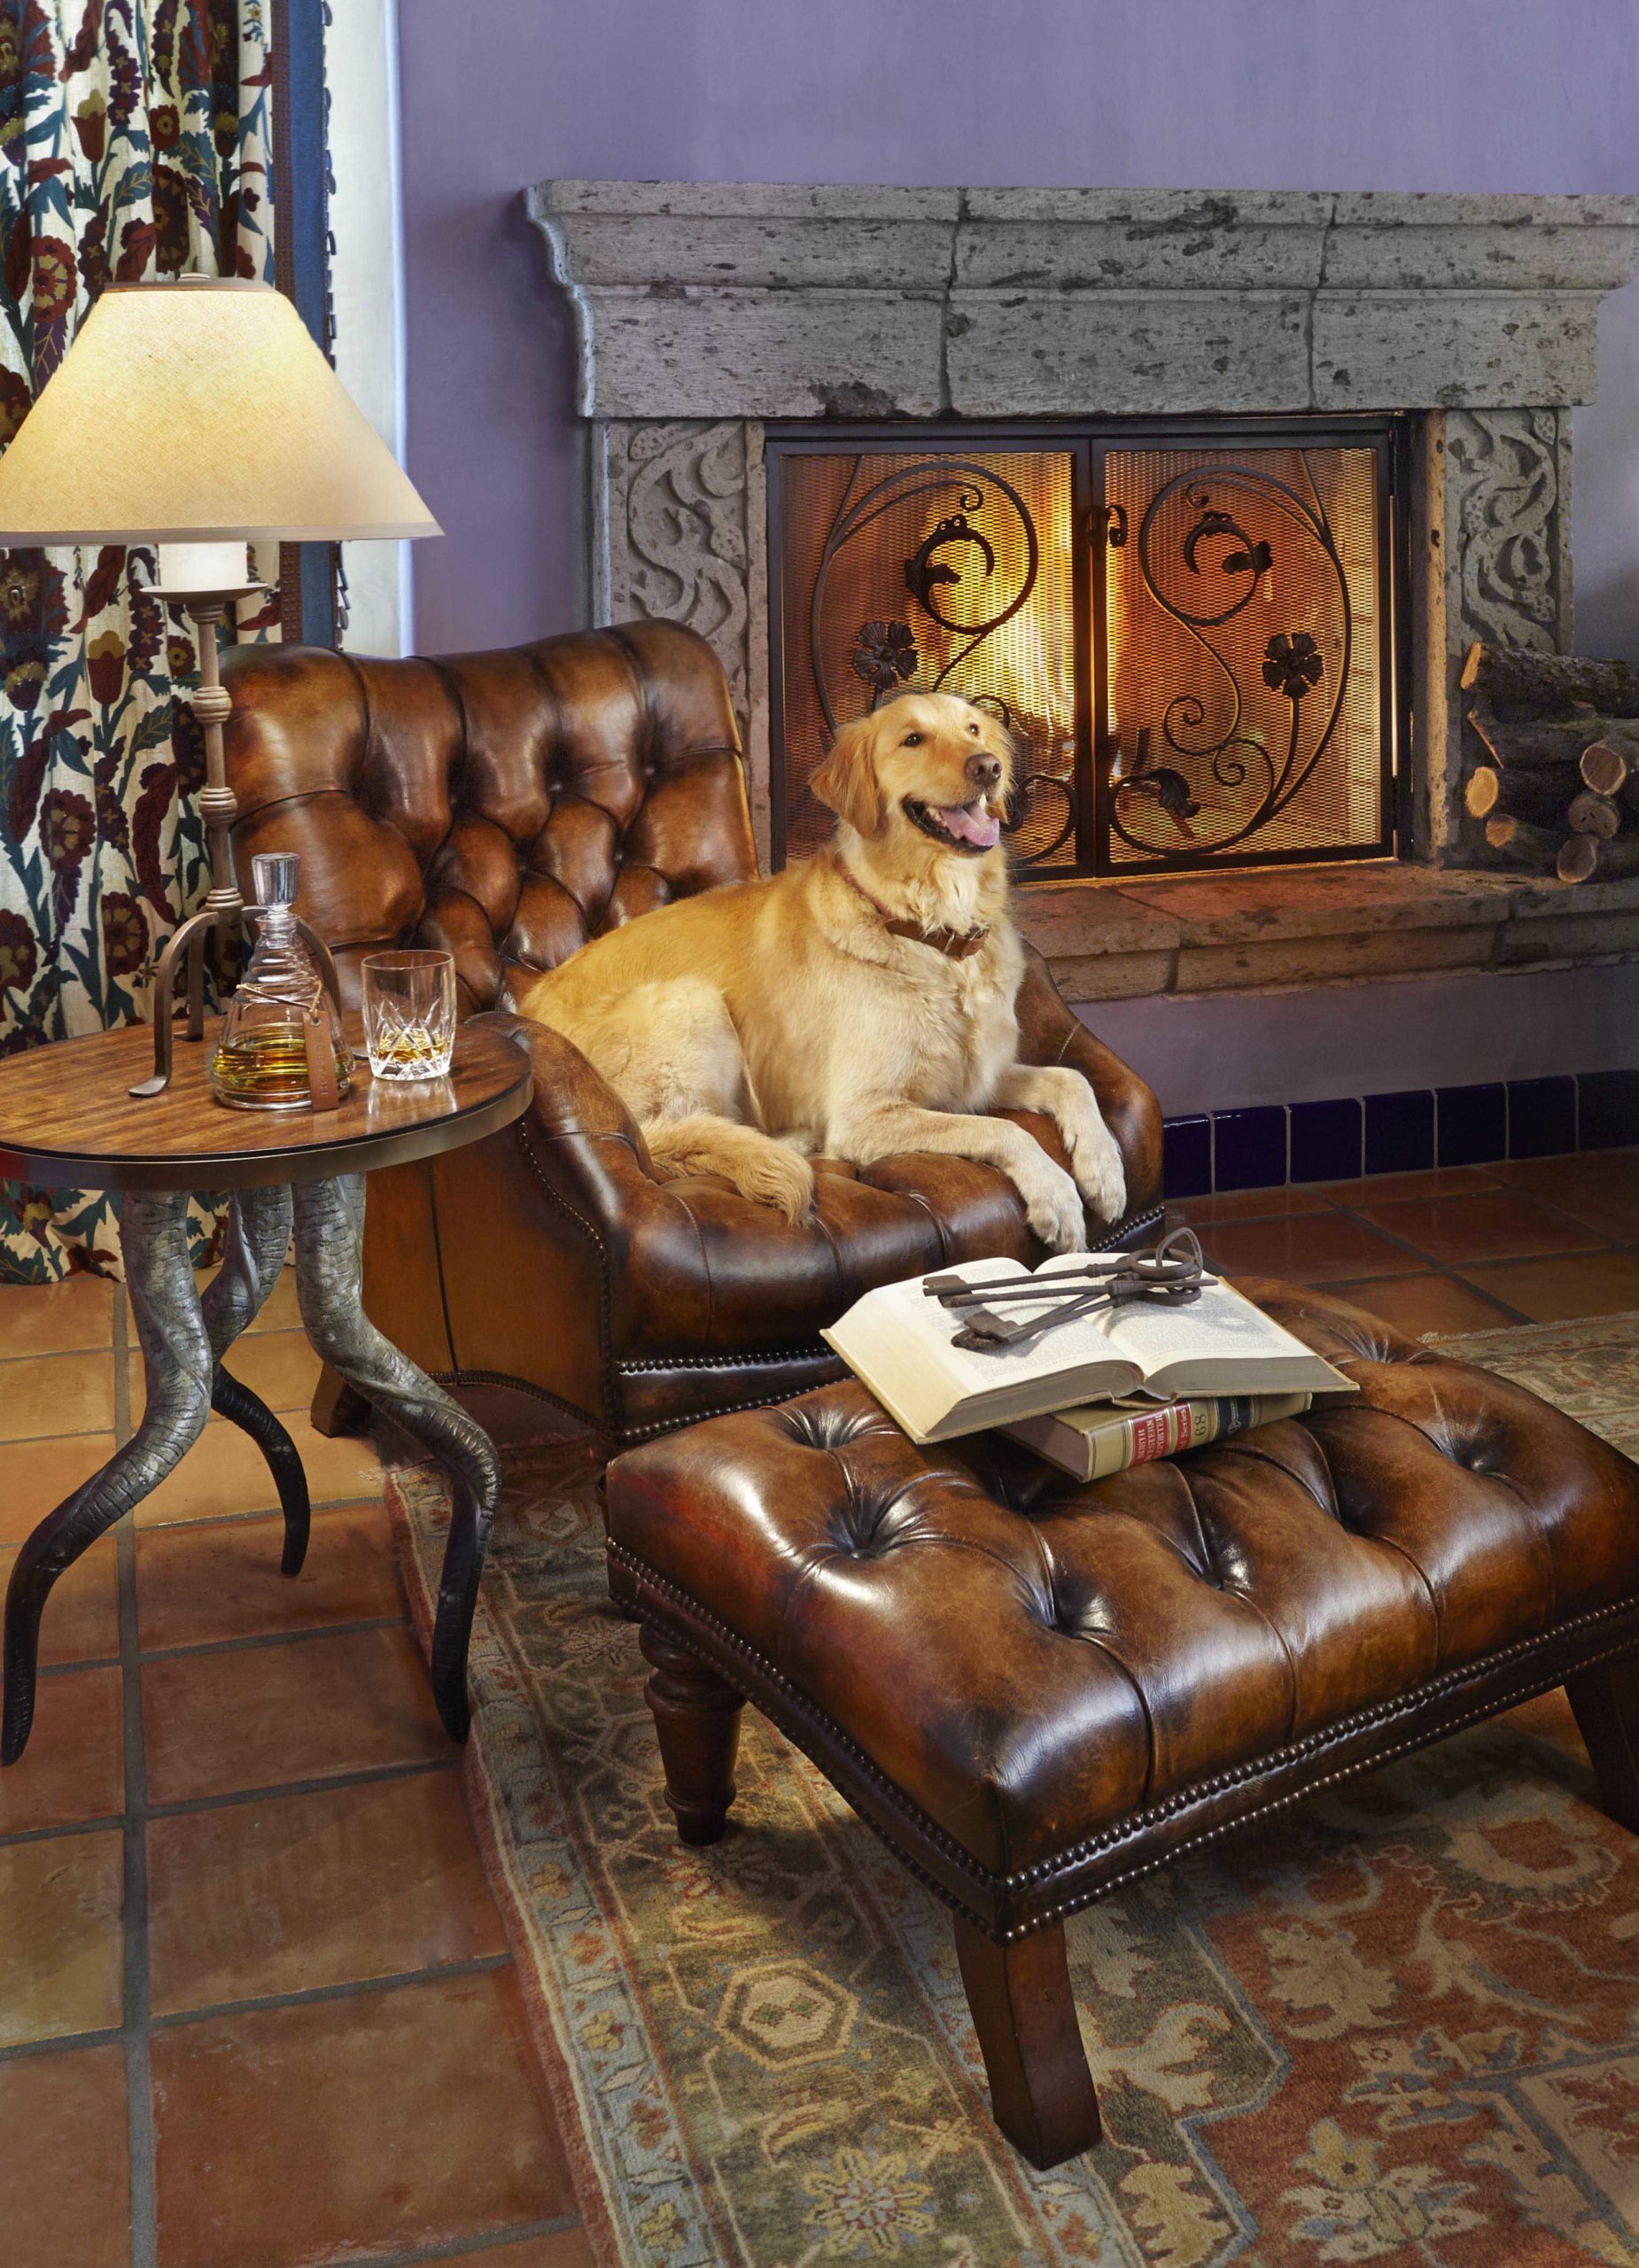 Leather chair in front of fire place with golden retriever sitting on it